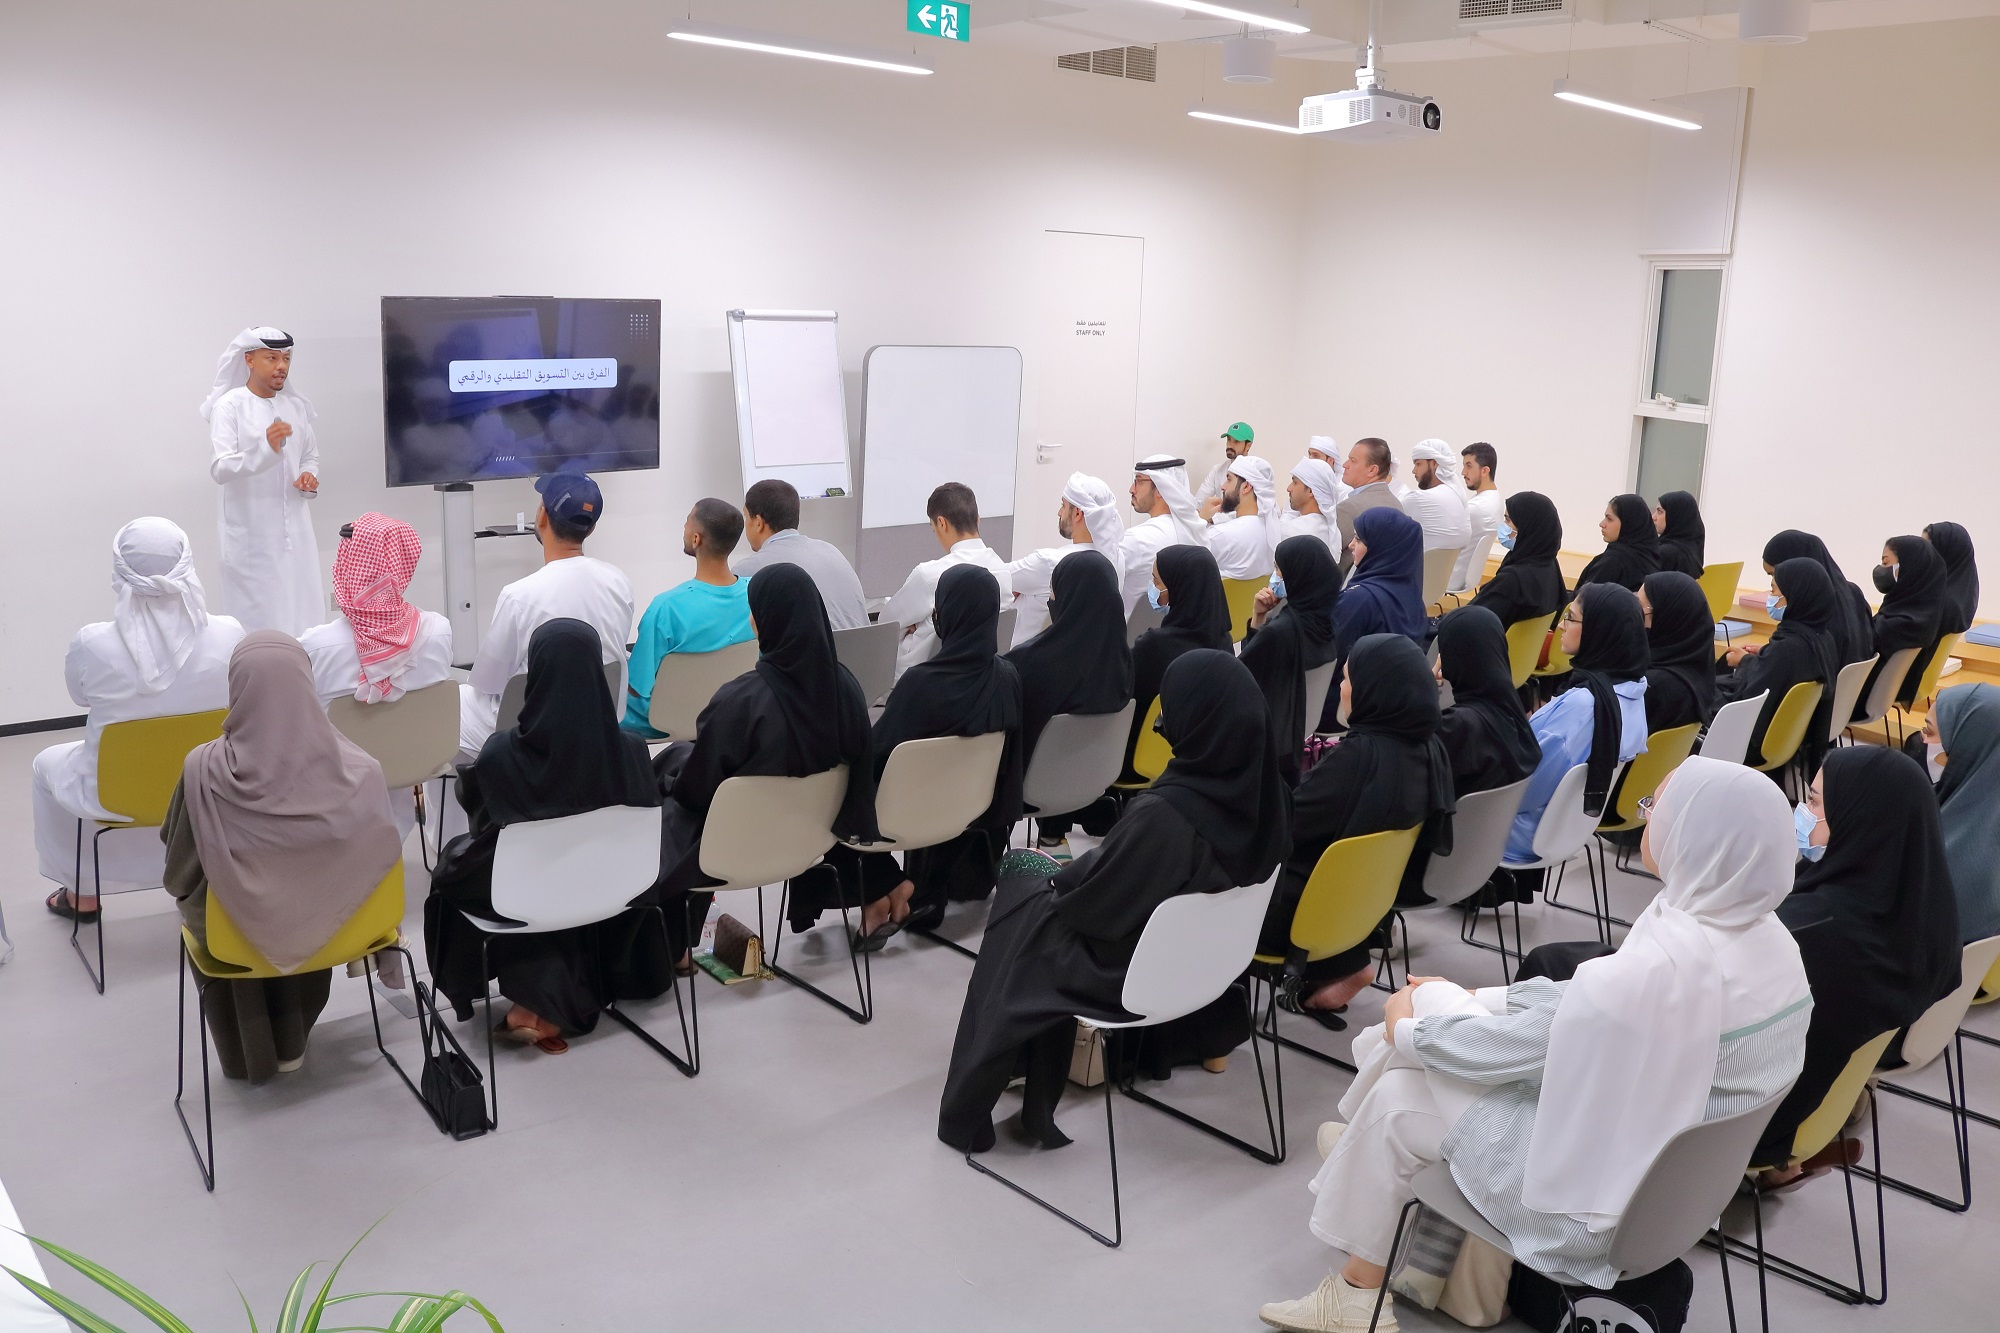 Ajman Chamber Organizes A "Digital Marketing" Workshop In Cooperation With The Ajman Creative Center